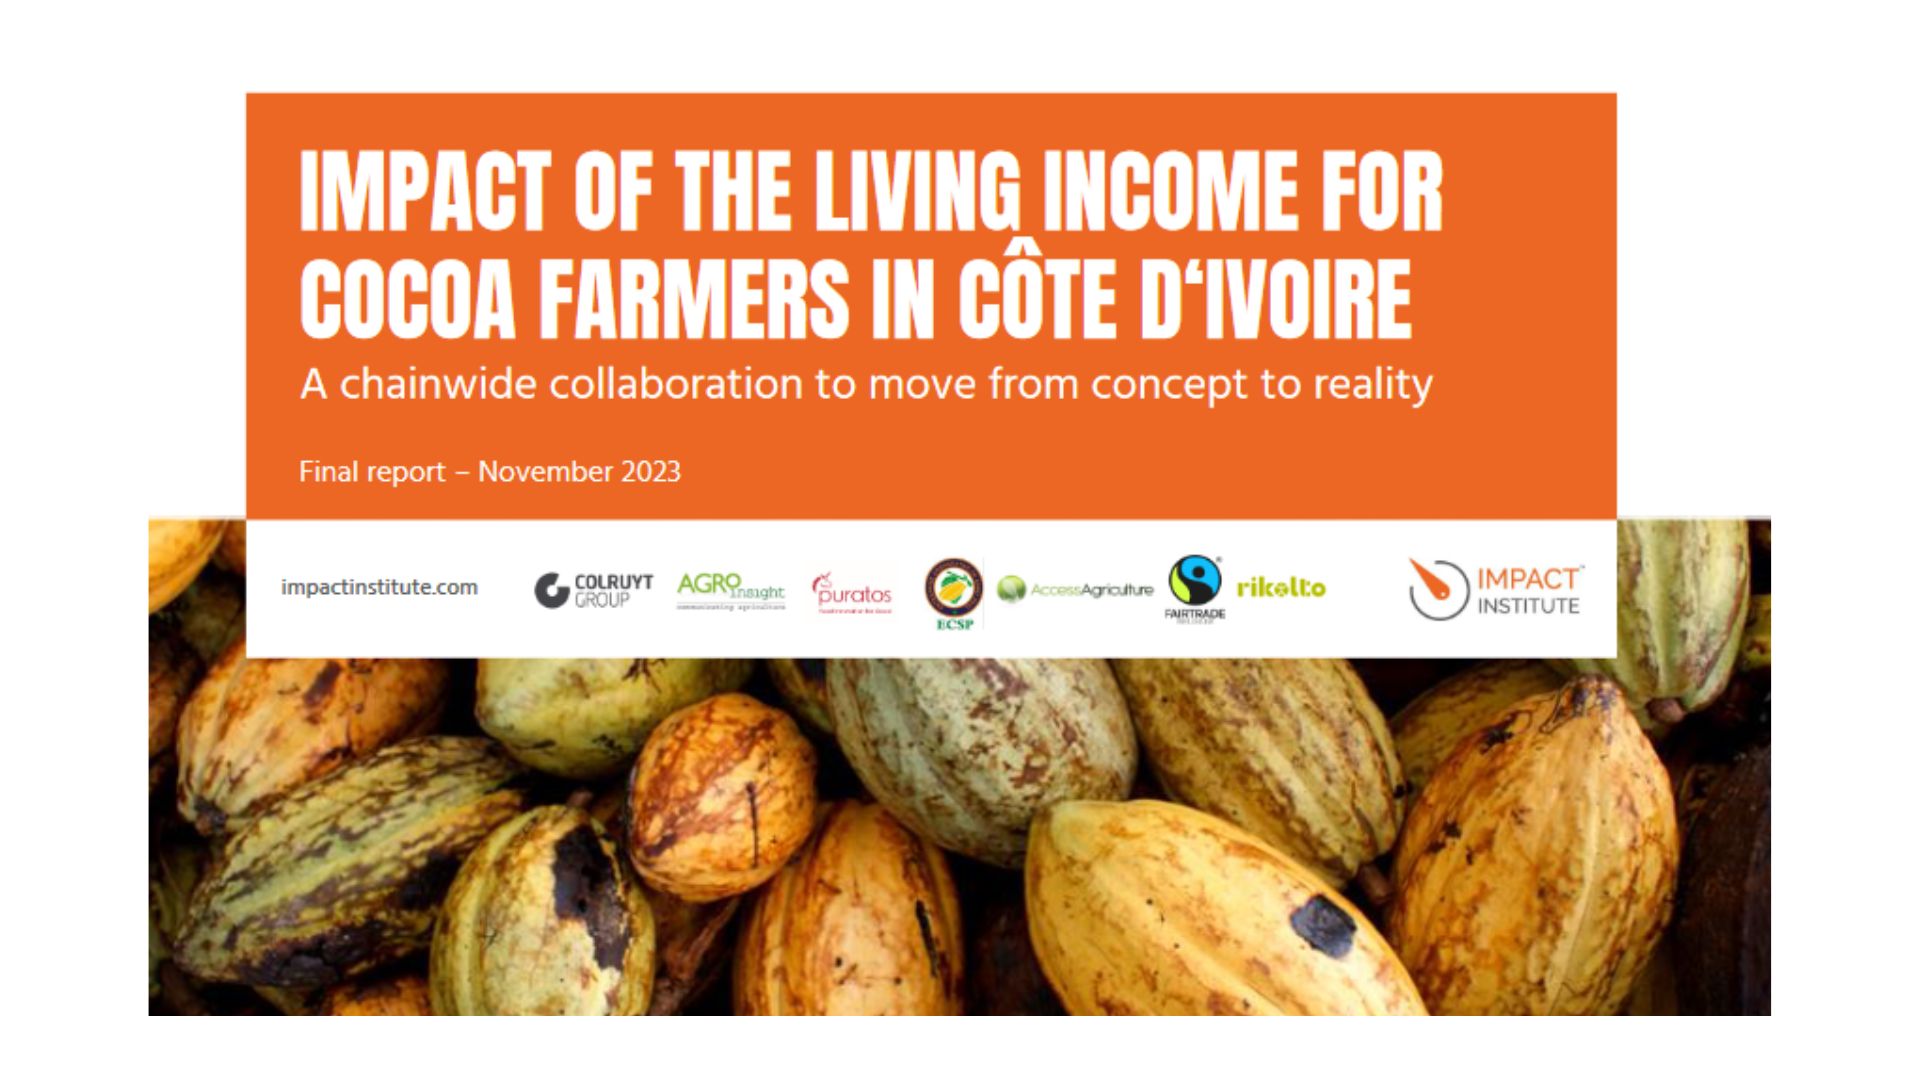 Impact of the living income for cocoa farmers picture